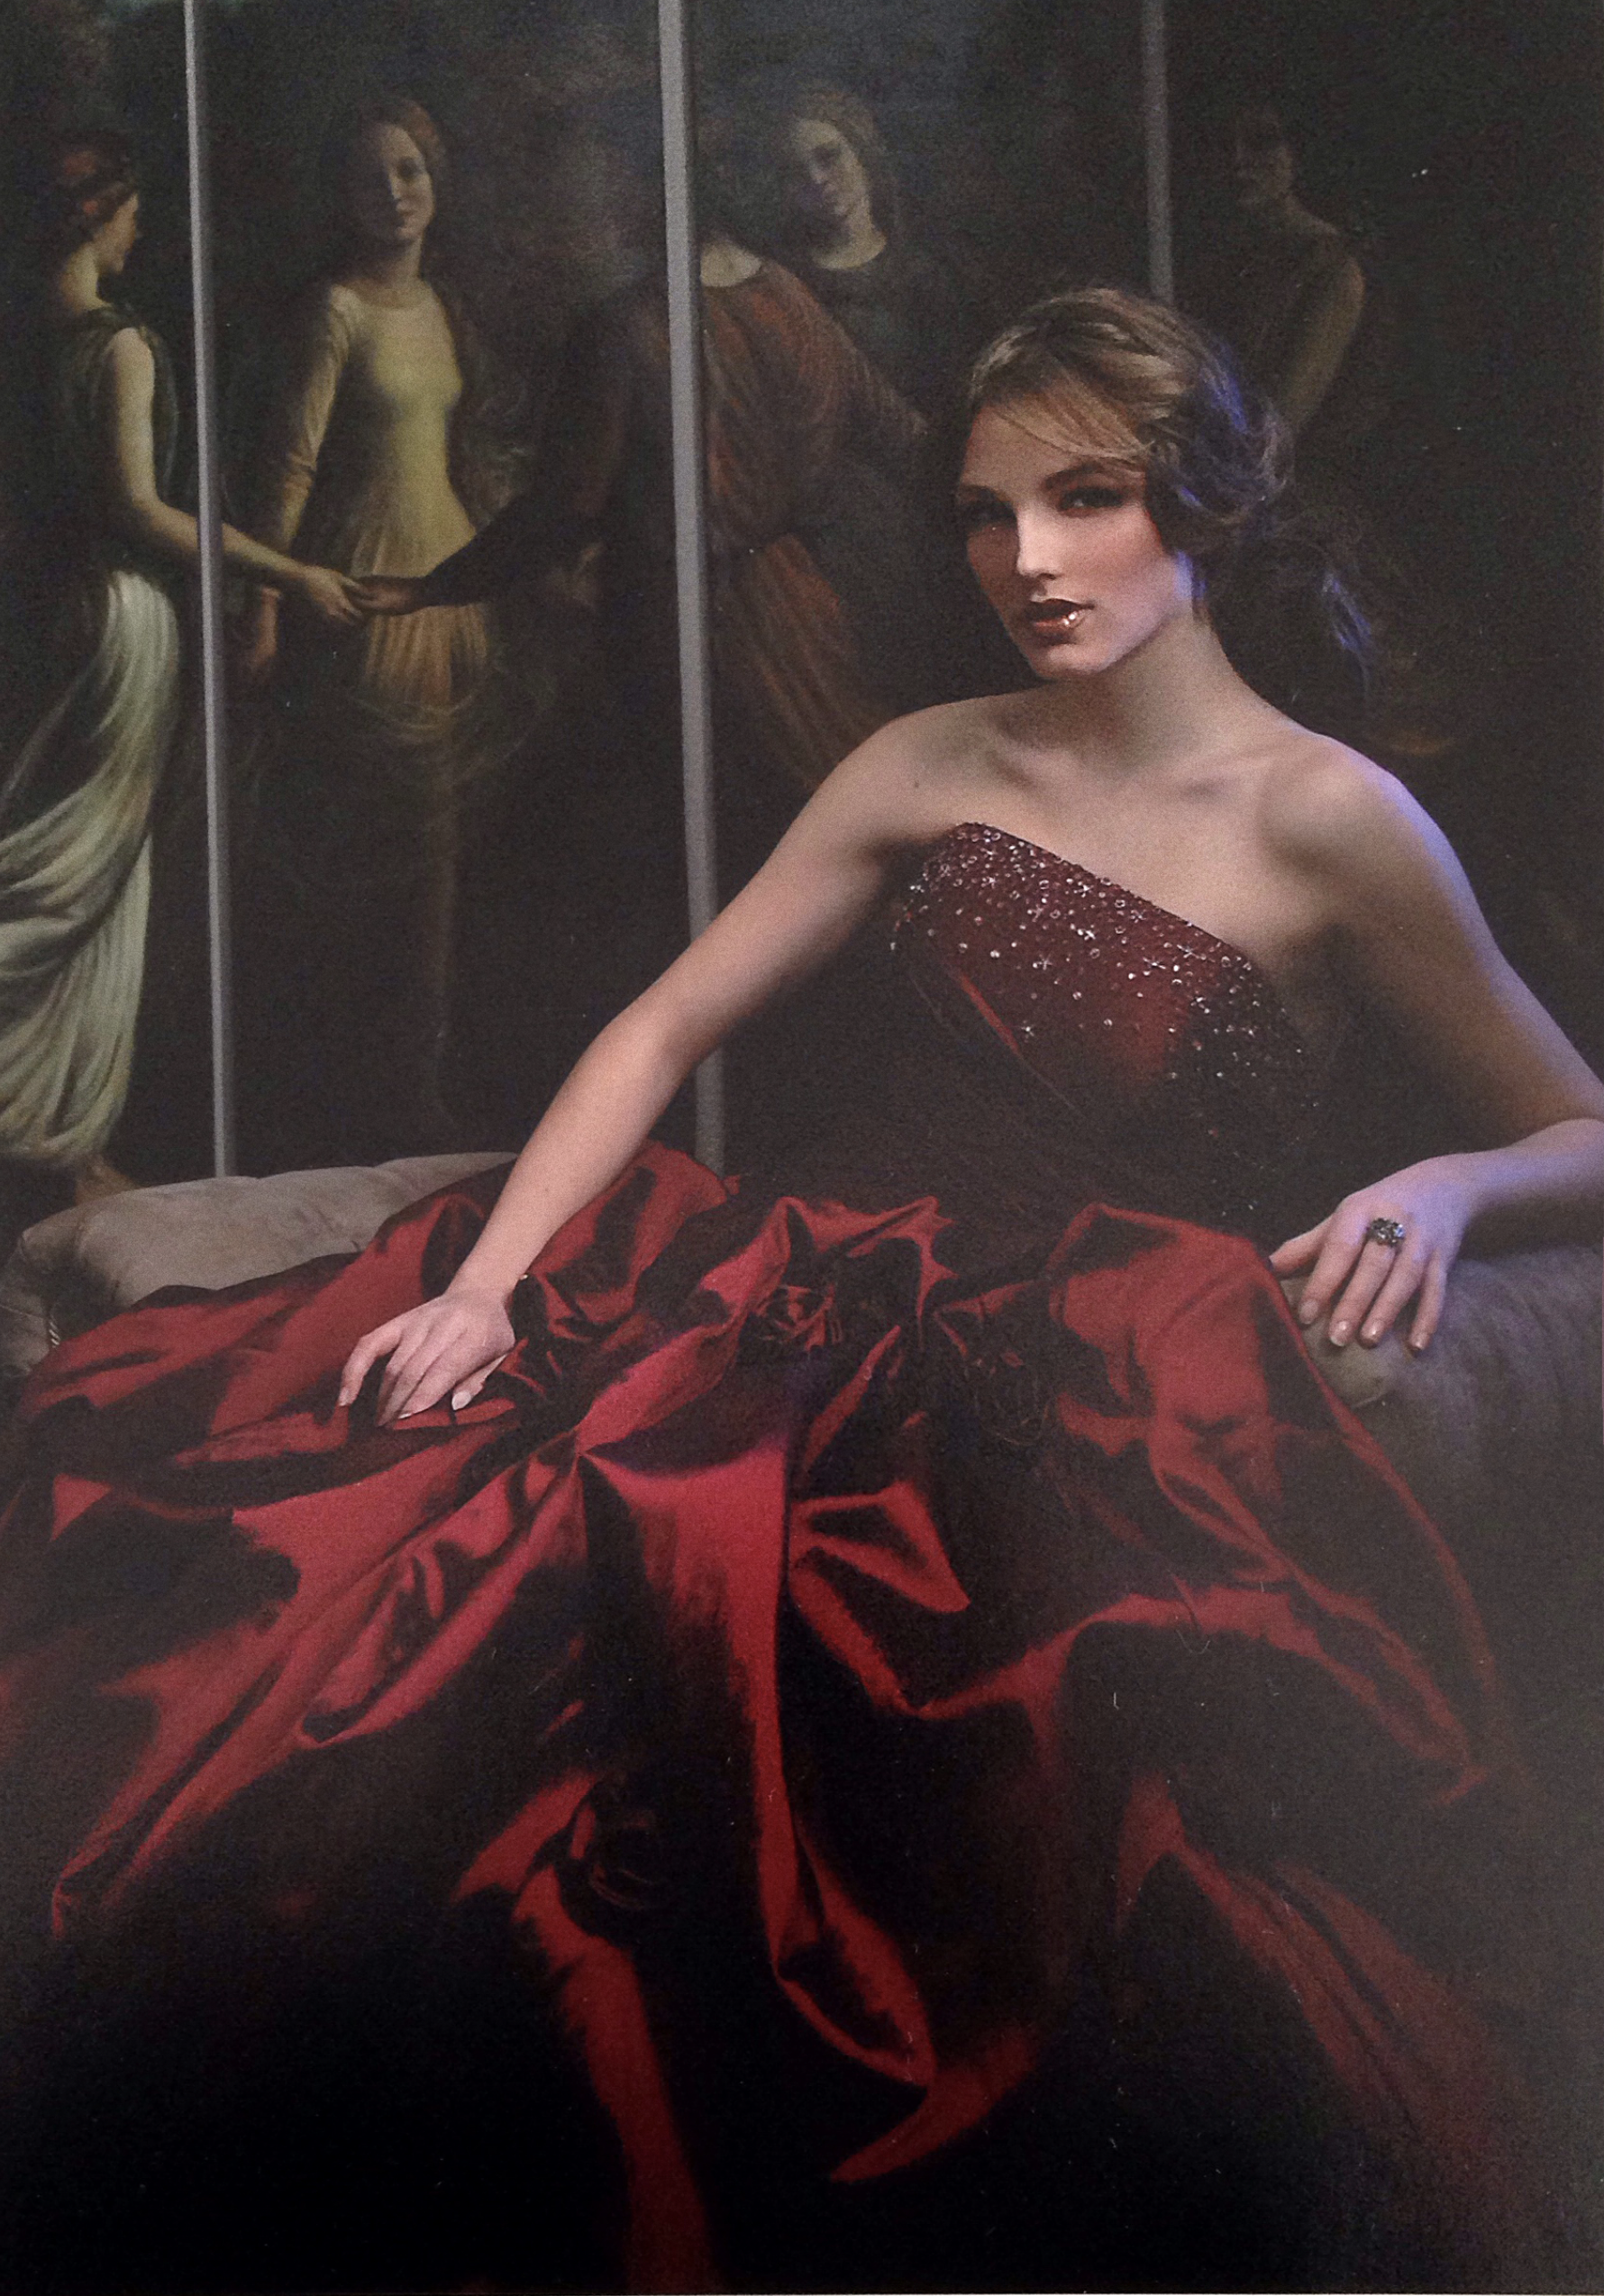 Bridal shoot, Toronto, Fashion Shoot, Red Gown, Model by the painting, shot on Nikon